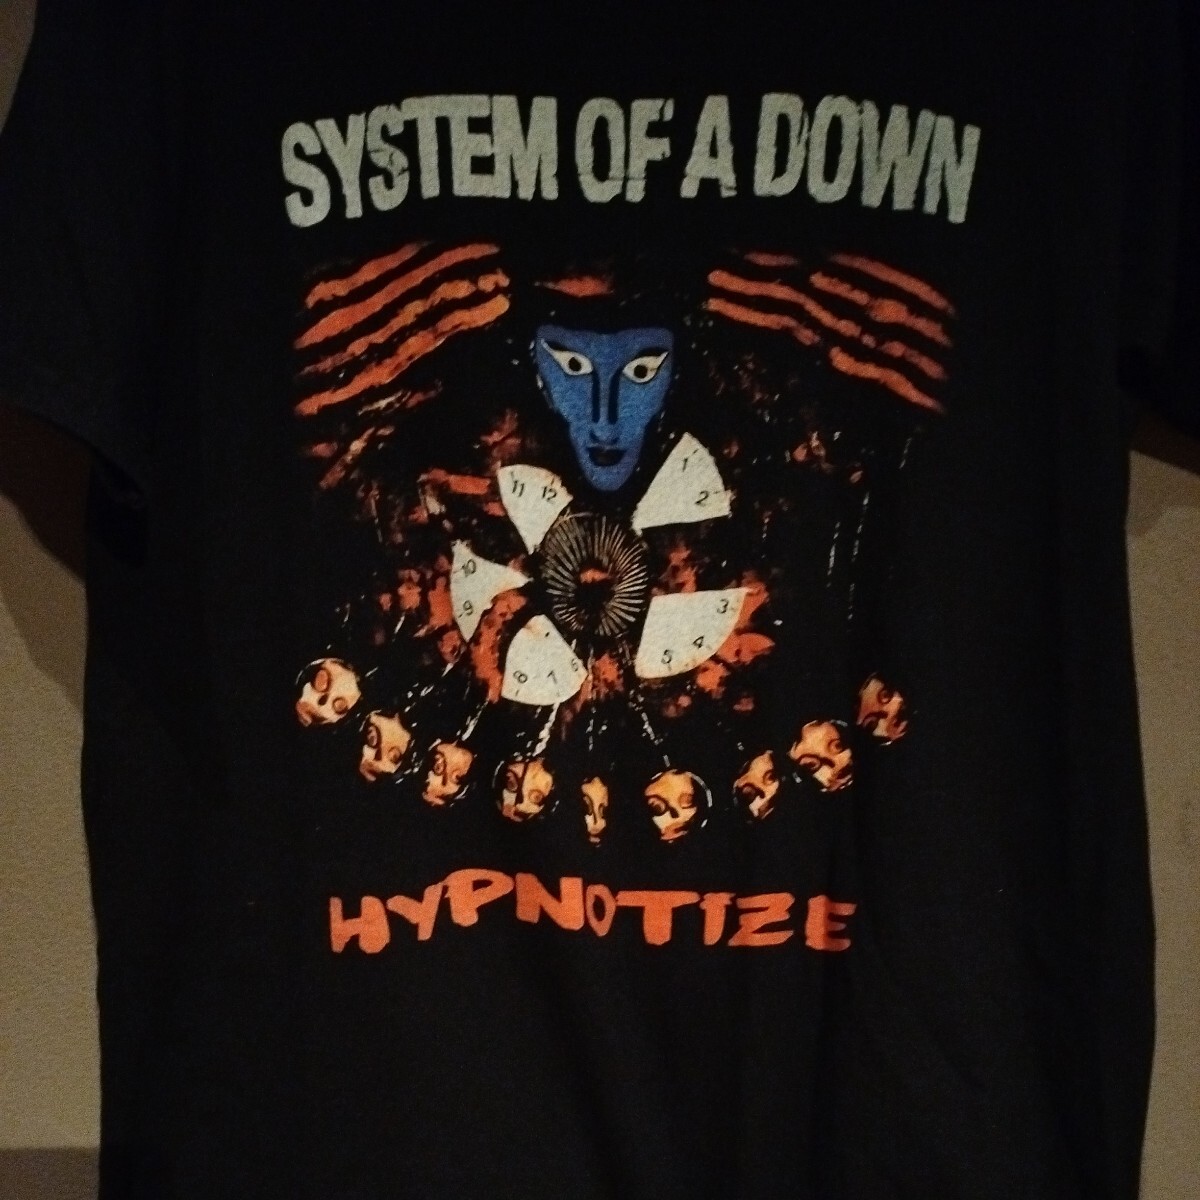 system of a down band T-shirt rage against machine korn rob zombie disturbed slipknot tool